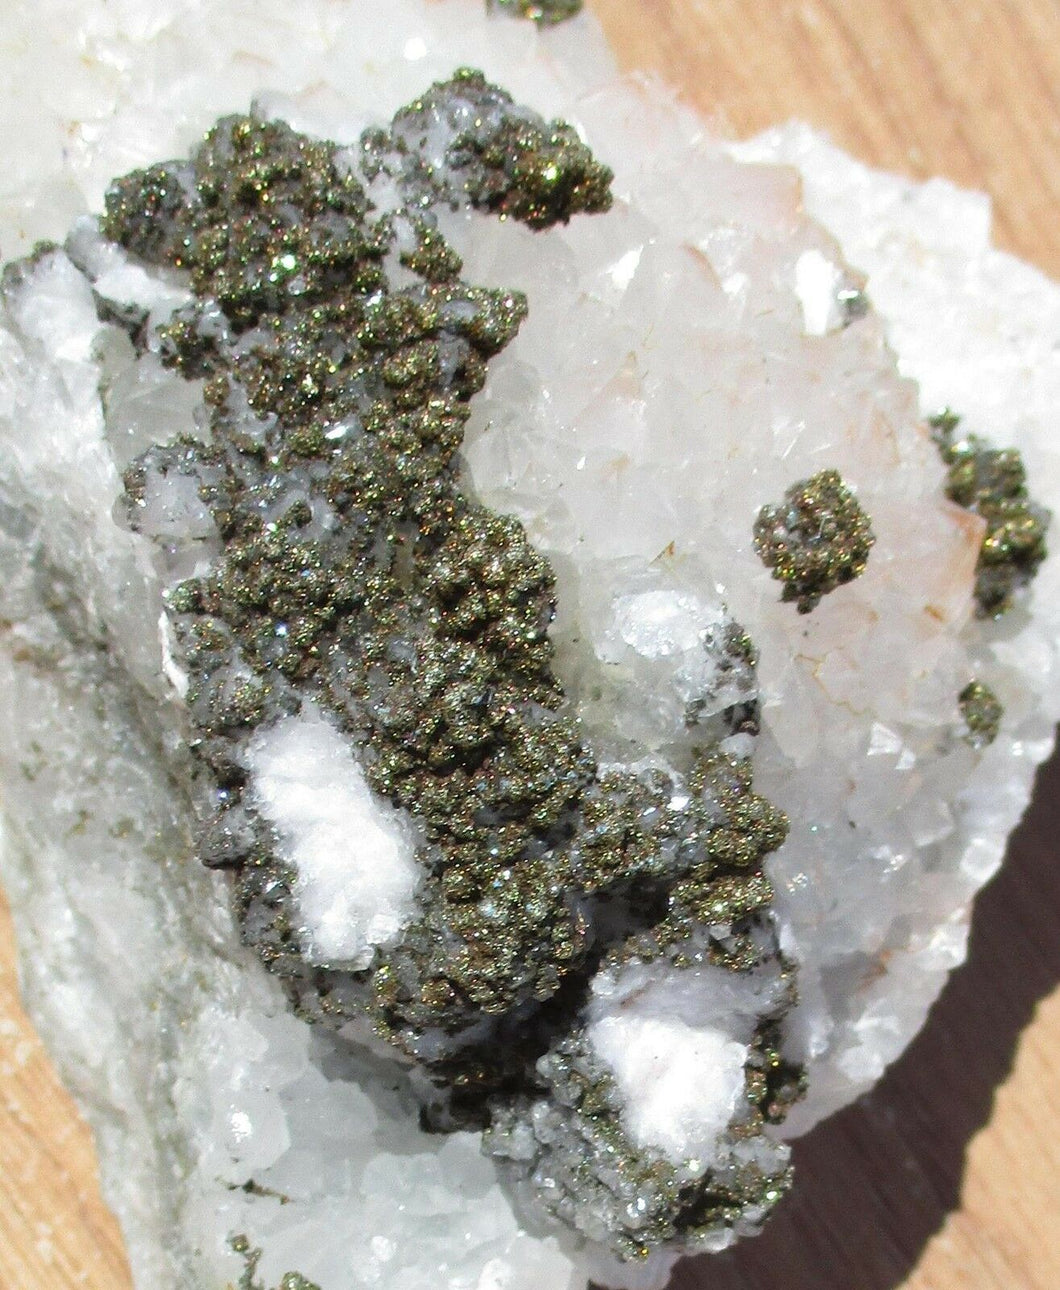 Pyrite Crystals on Quartz Crystals with some Calcite Crystals Large Specimen 4